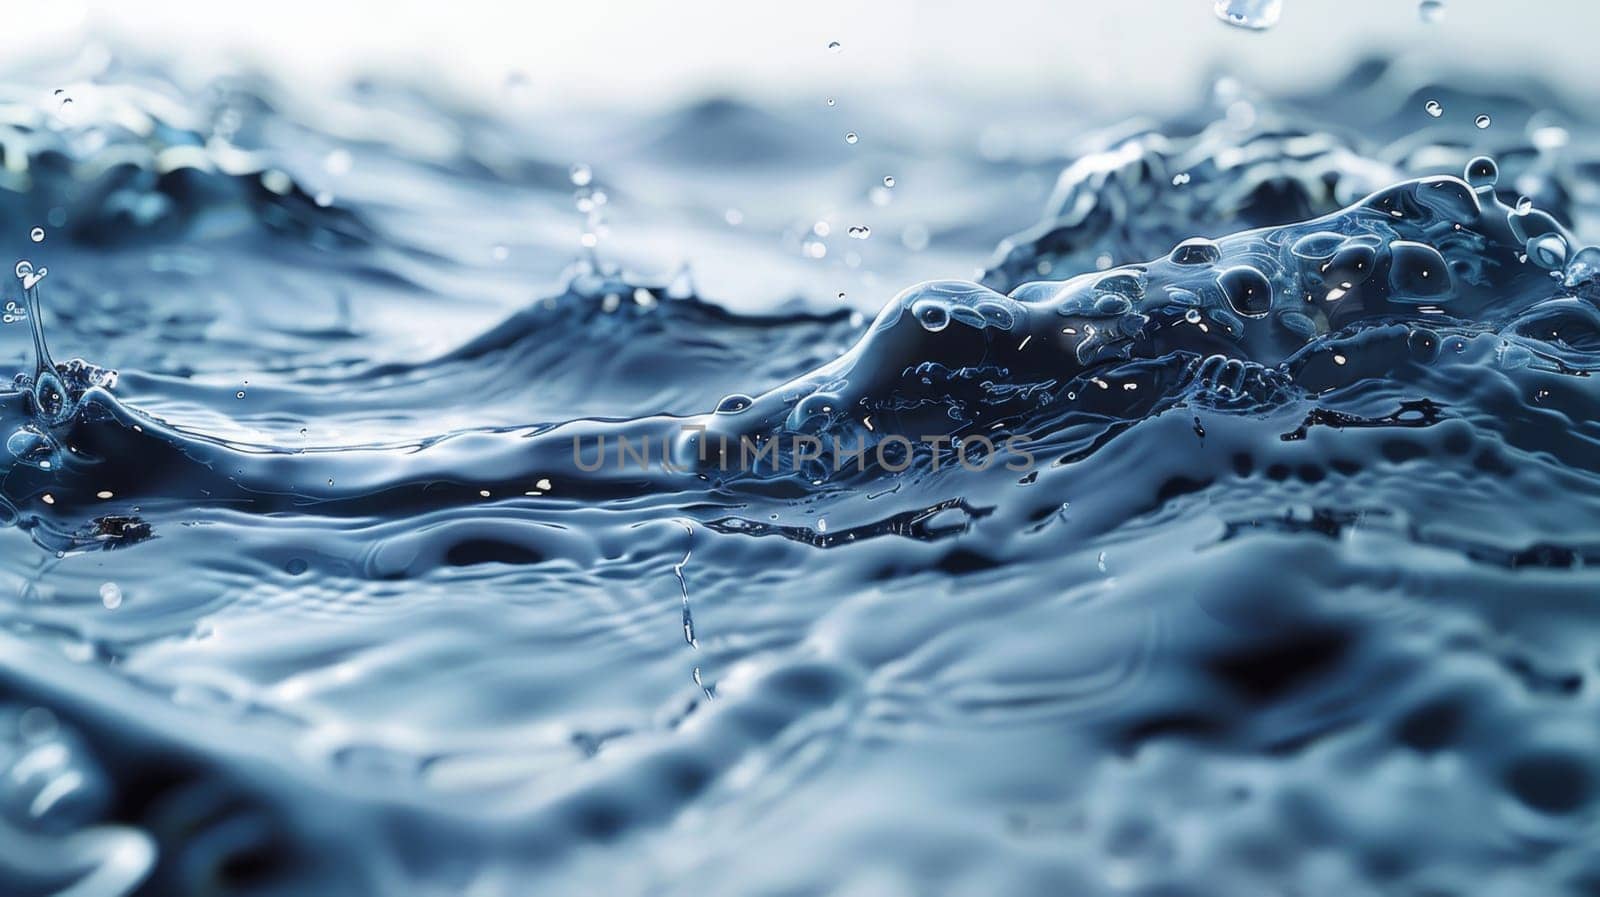 Textured background of transparent clear water.